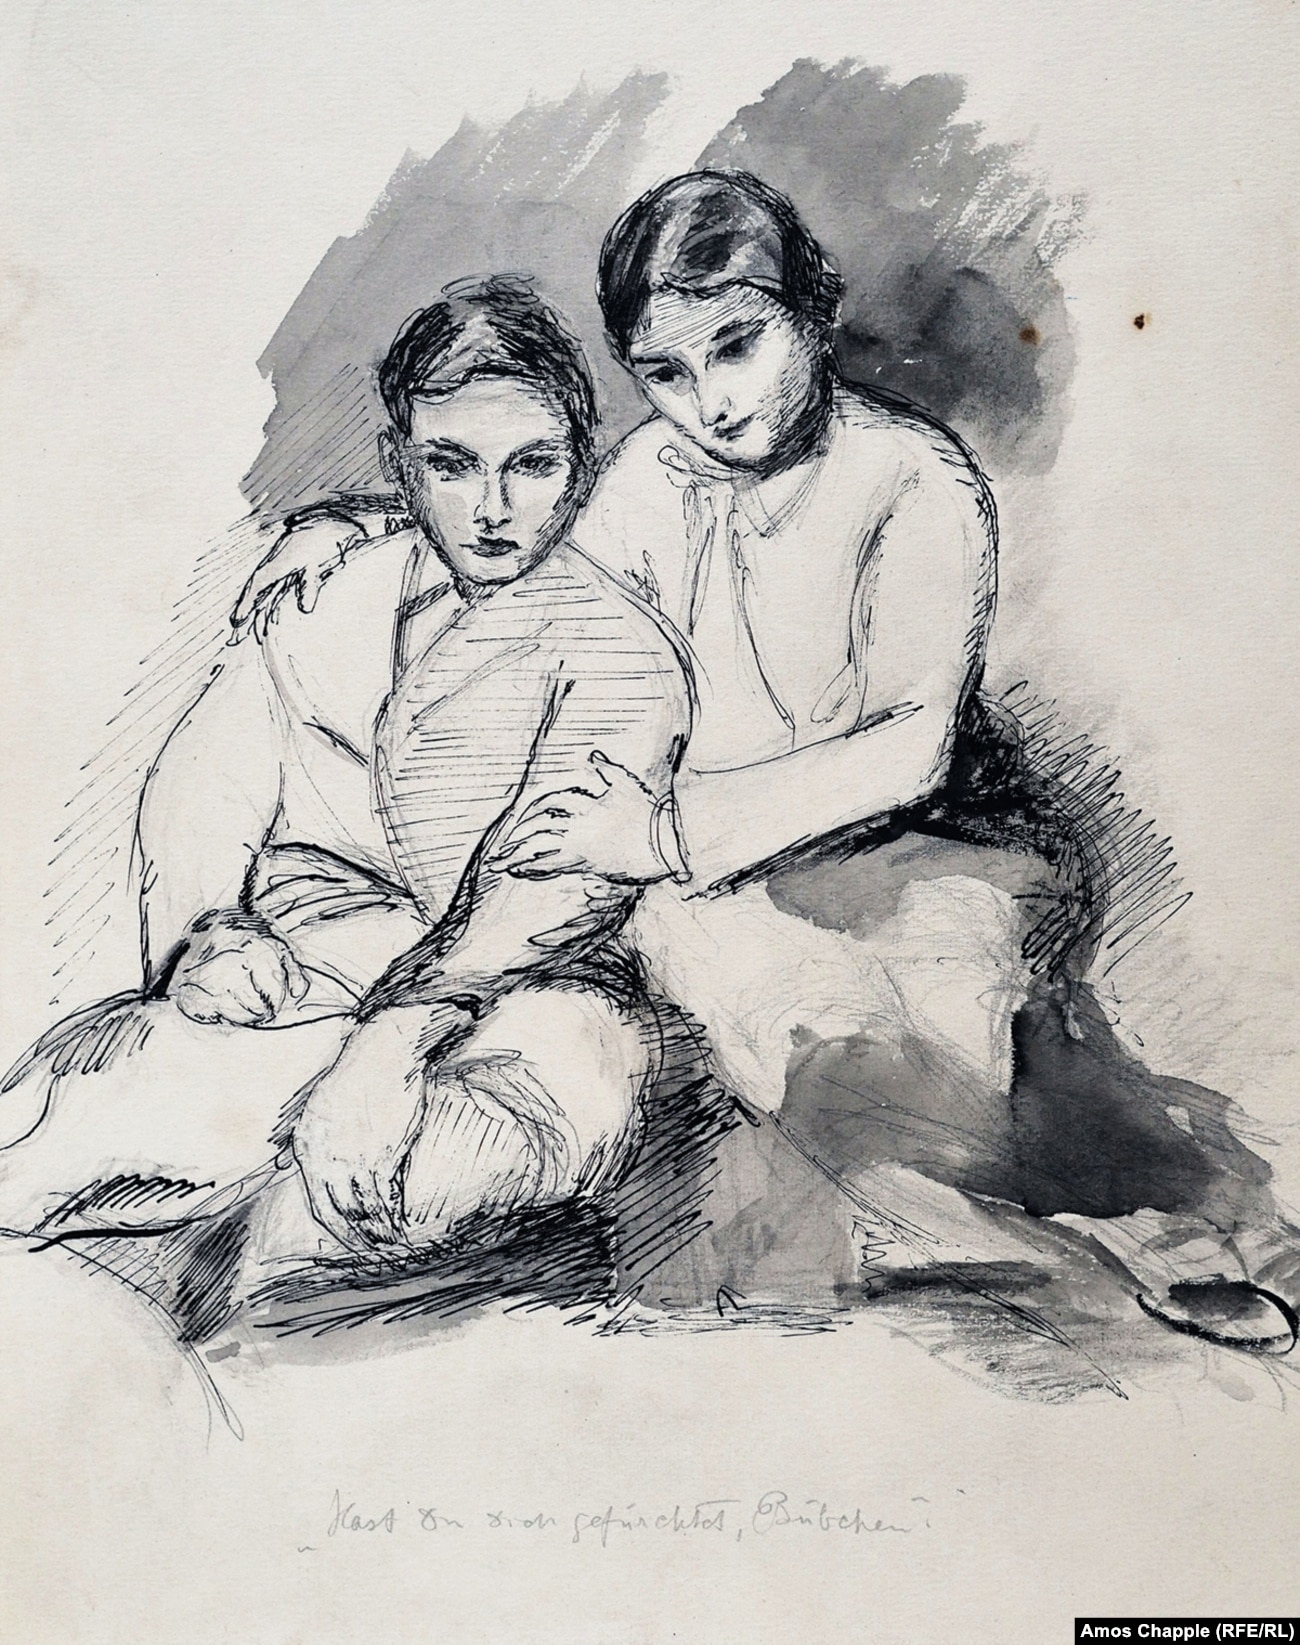 A sketch captioned with the phrase "Were you frightened, little one?" may depict Gertrud Kauders with Cornelius (1916-2002), the father of Miriam Kauders.